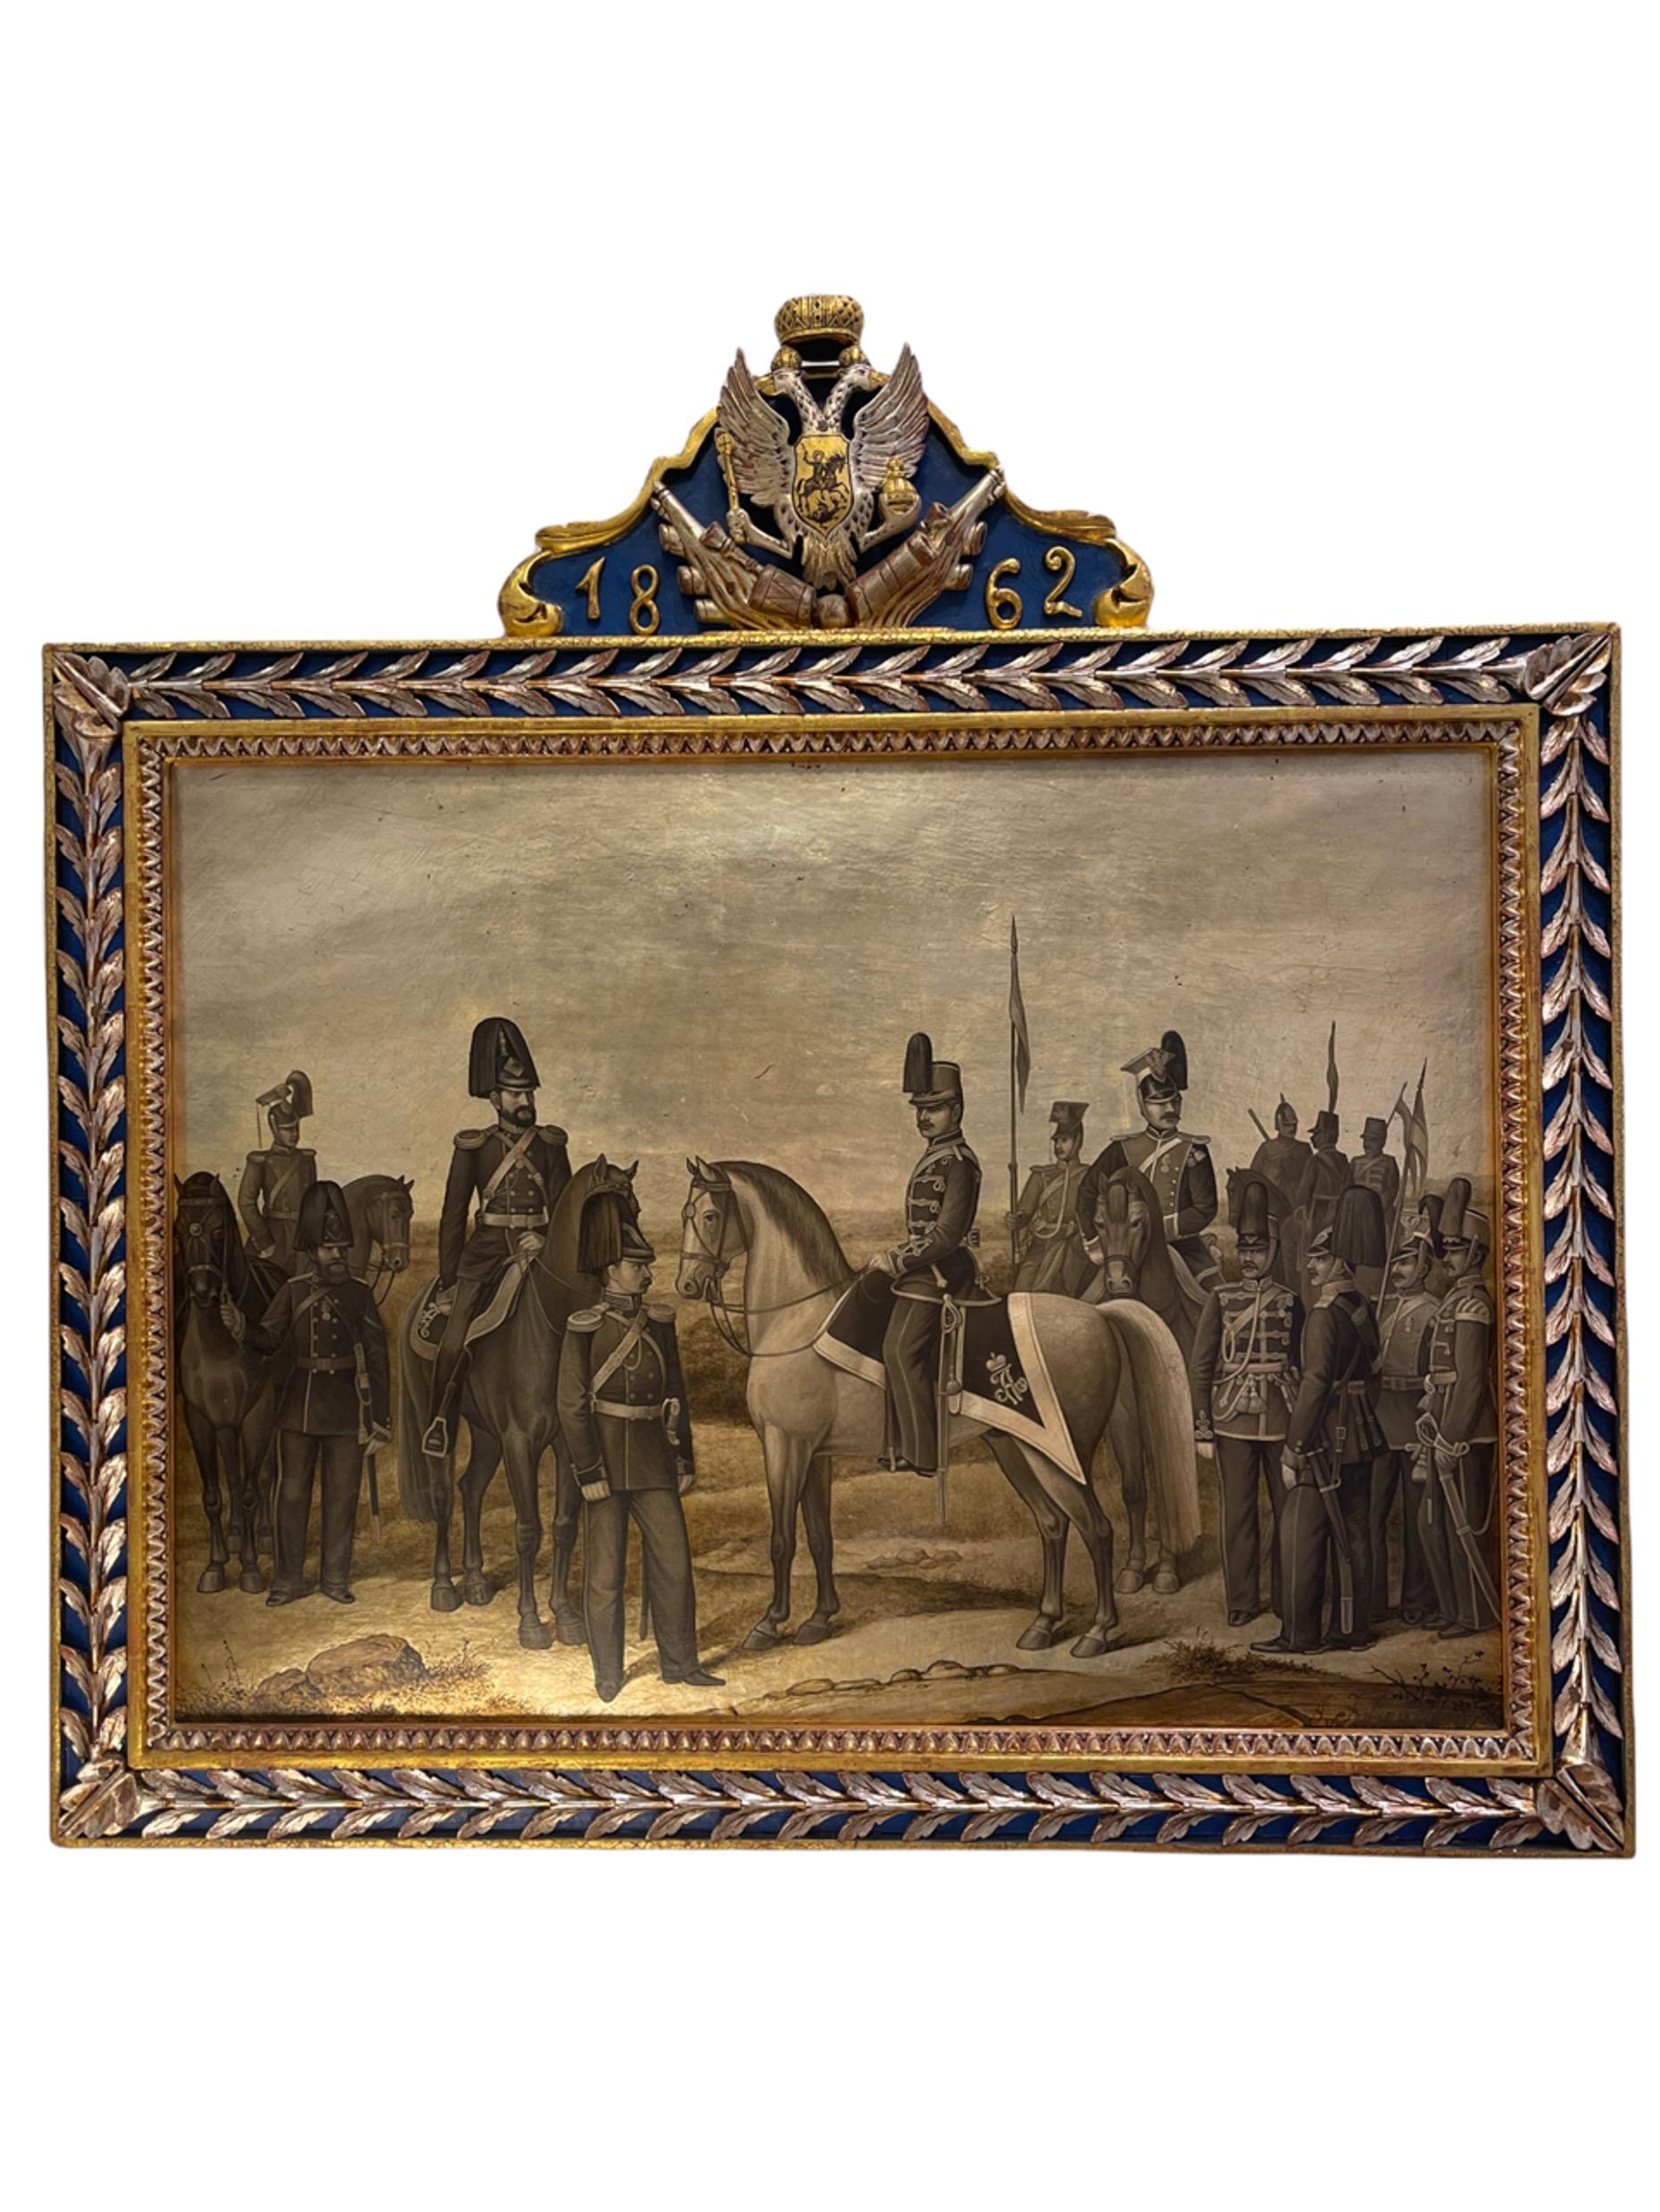 A set of three Russian Military presentation plaques that were made for a military celebration commemorating battles in the years of 1859, 1862 and 1864. They were given as gifts to members for their achievements. These paintings were painted with